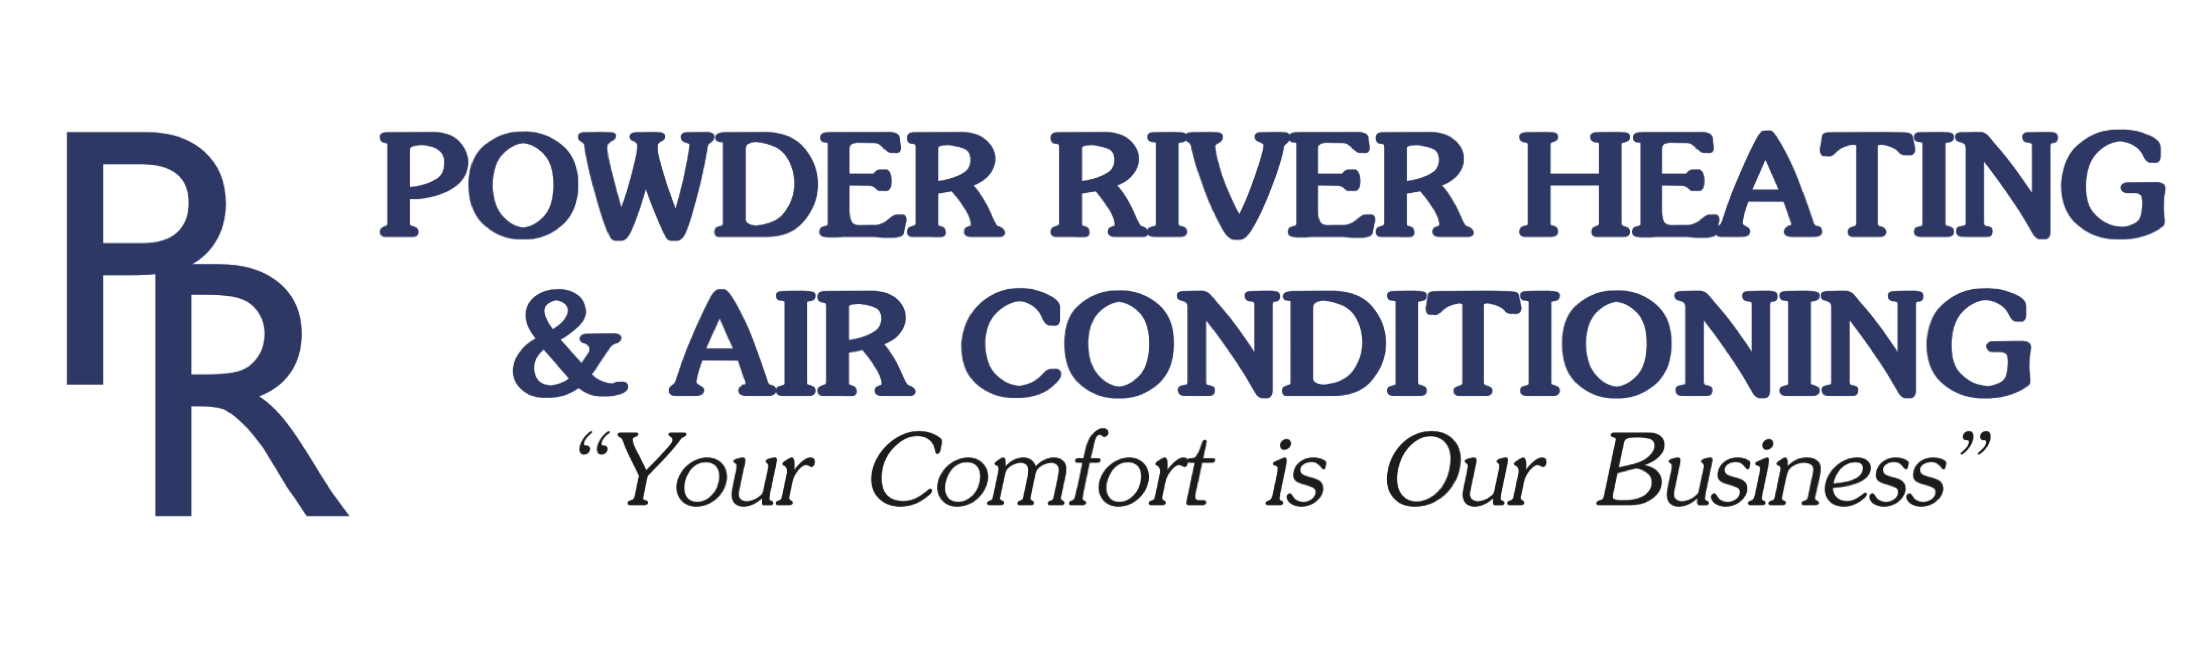 Powder River Heating & Air Conditioning